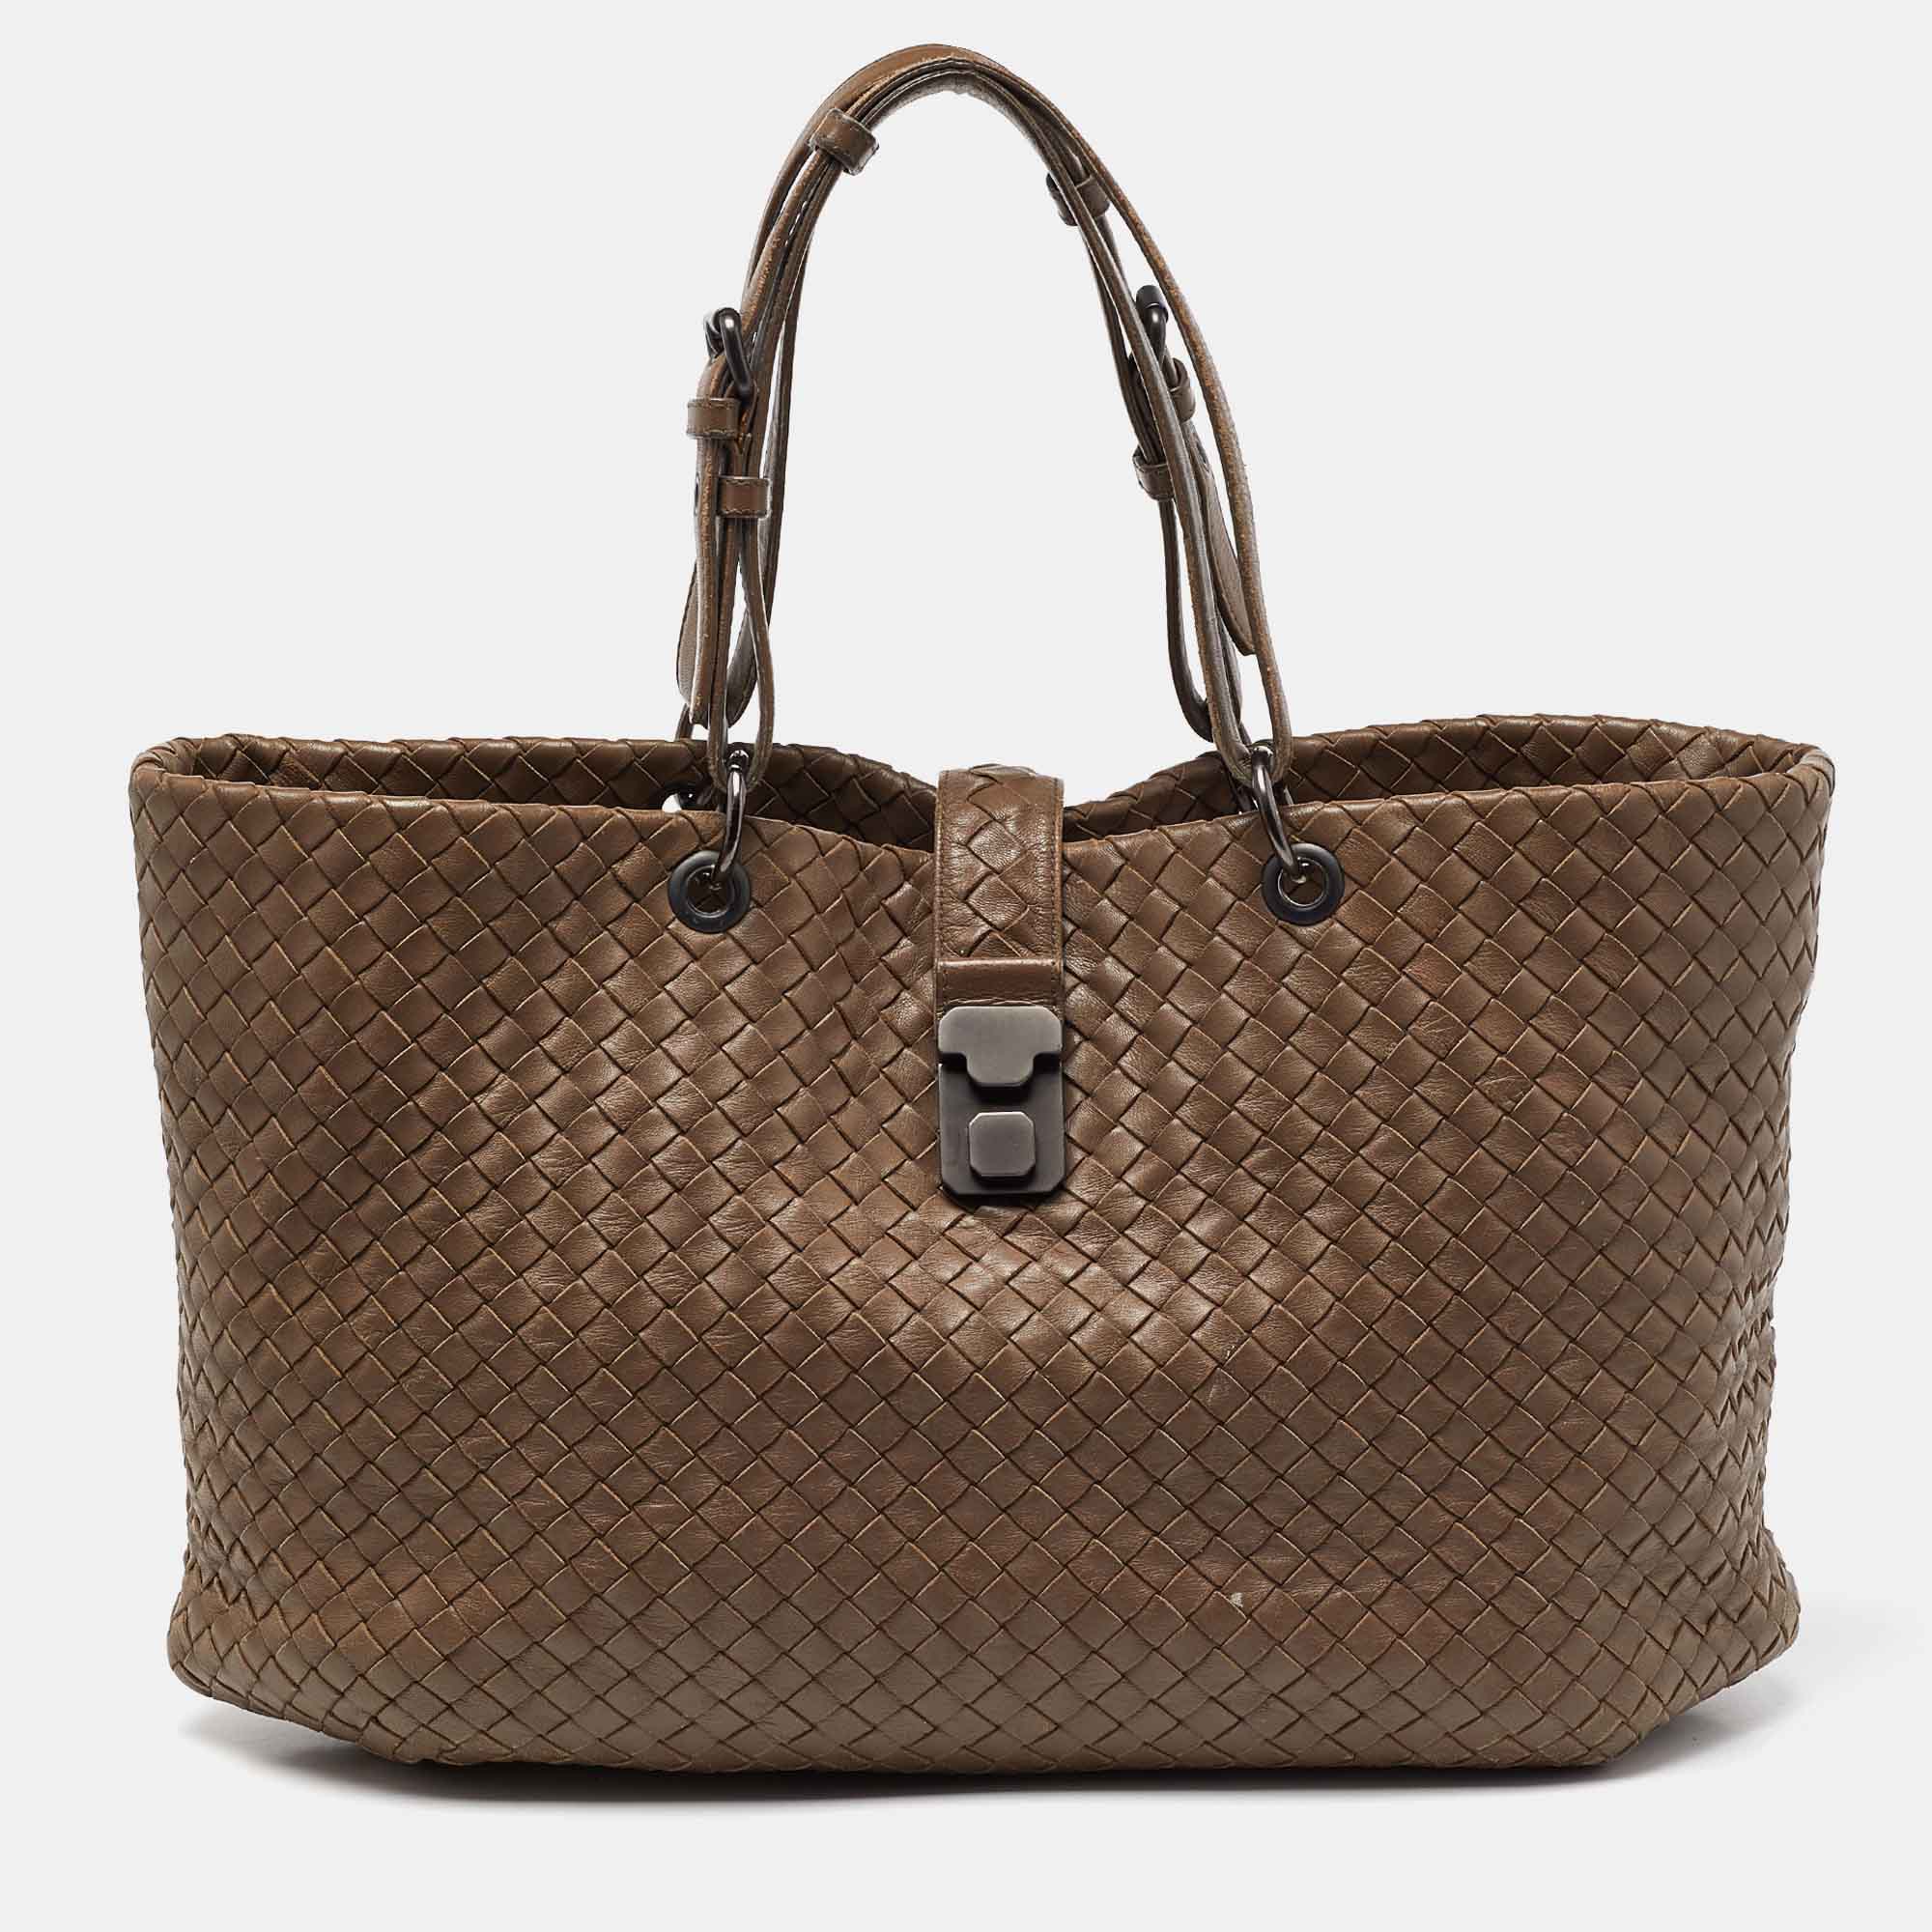 This luxurious Capri tote from Bottega Veneta is ideal for everyday use. Crafted from black leather it features adjustable top handles and a woven pattern all over. The buckled closure opens to a suede lined roomy interior that can hold your daily essentials and more.